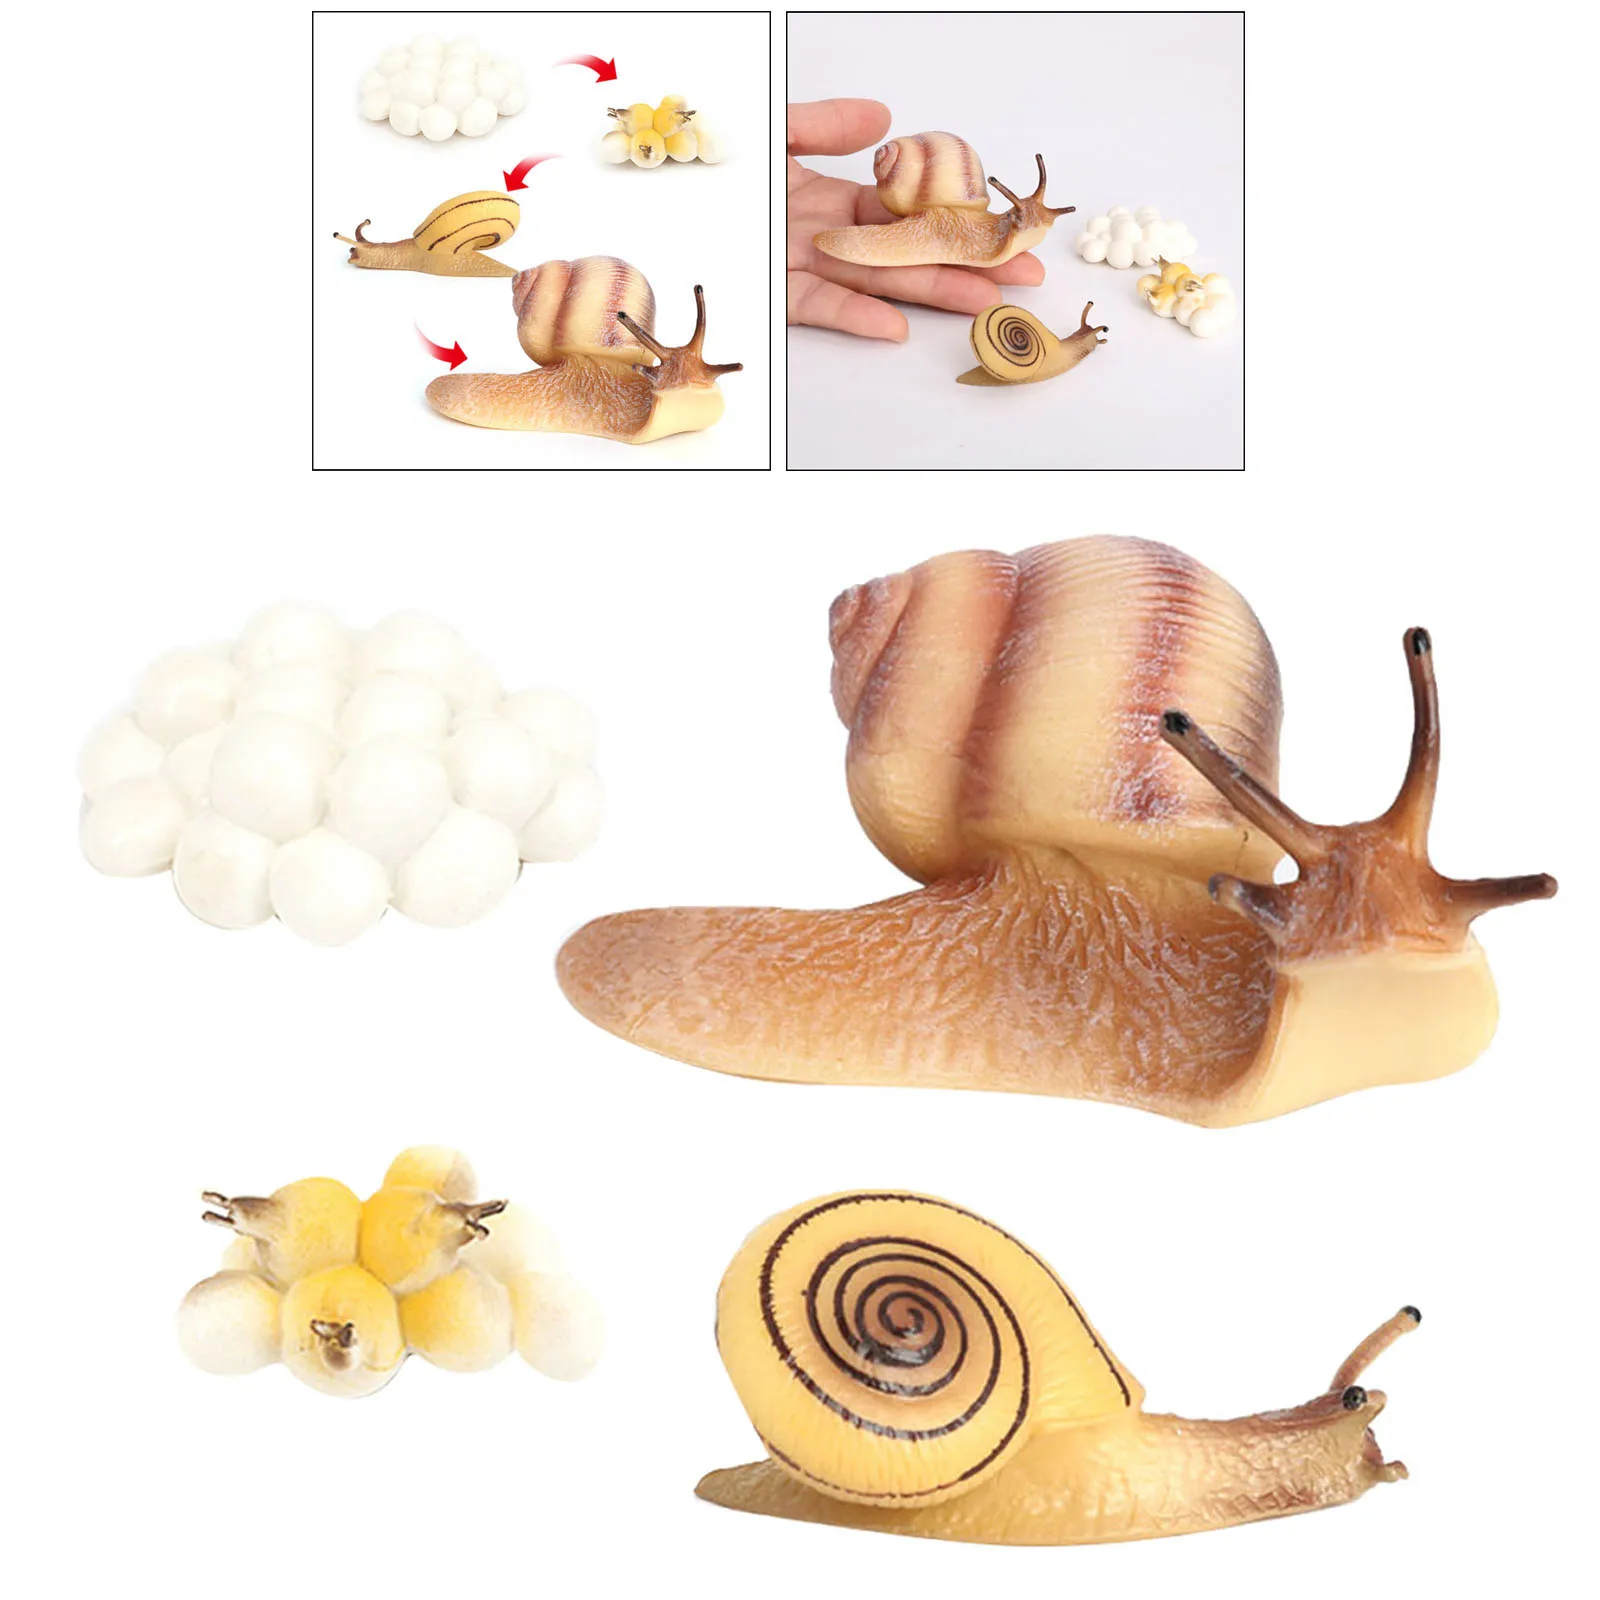 Realistic Growth Cycle Toys Nature Life Cycle Animal Snail Model